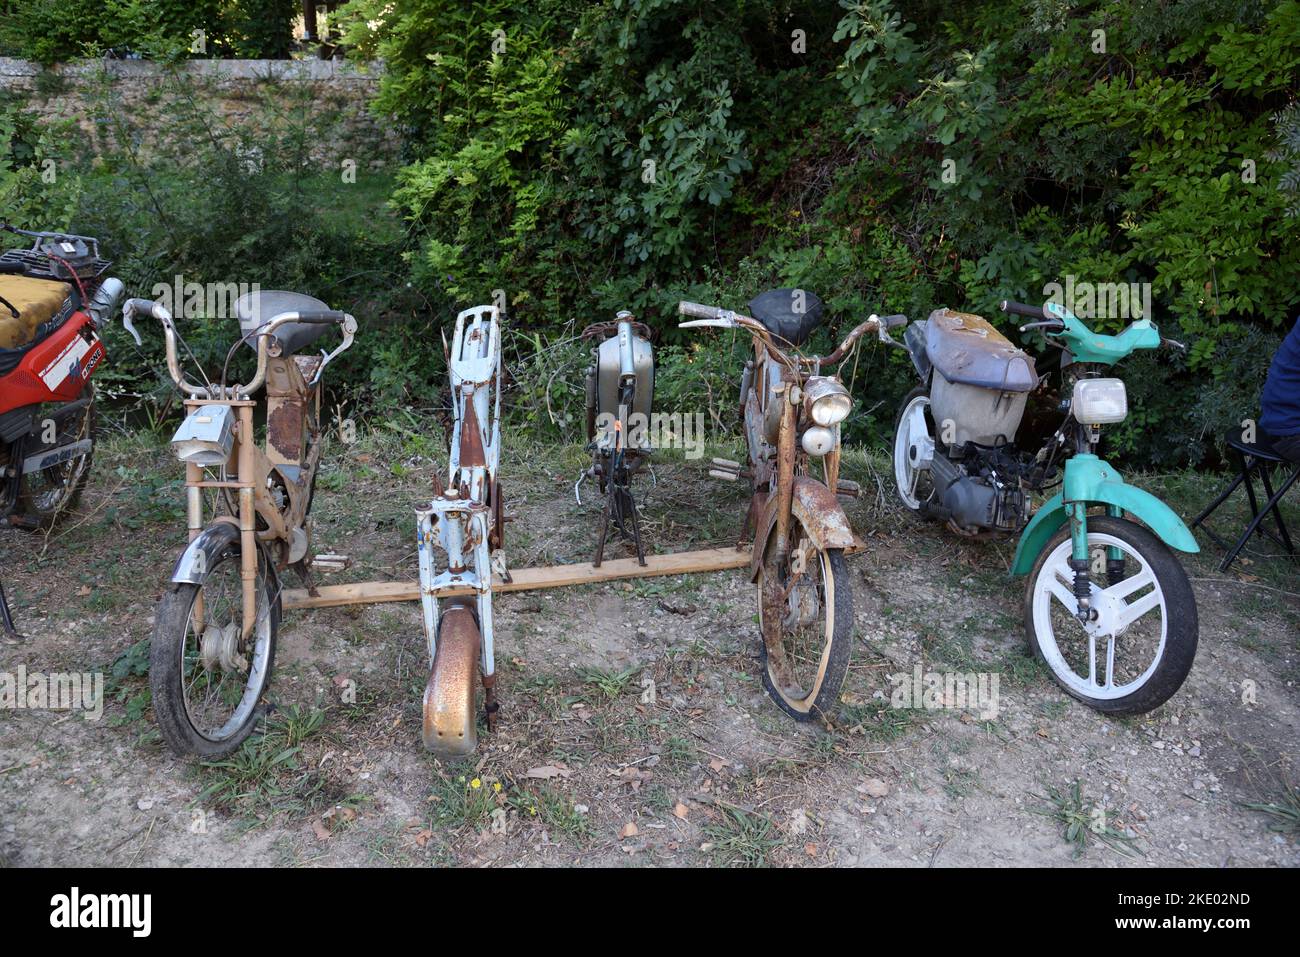 Wrecks of Rusty Old Motorcycles or Motorbikes for Sale for Restoration Project Stock Photo